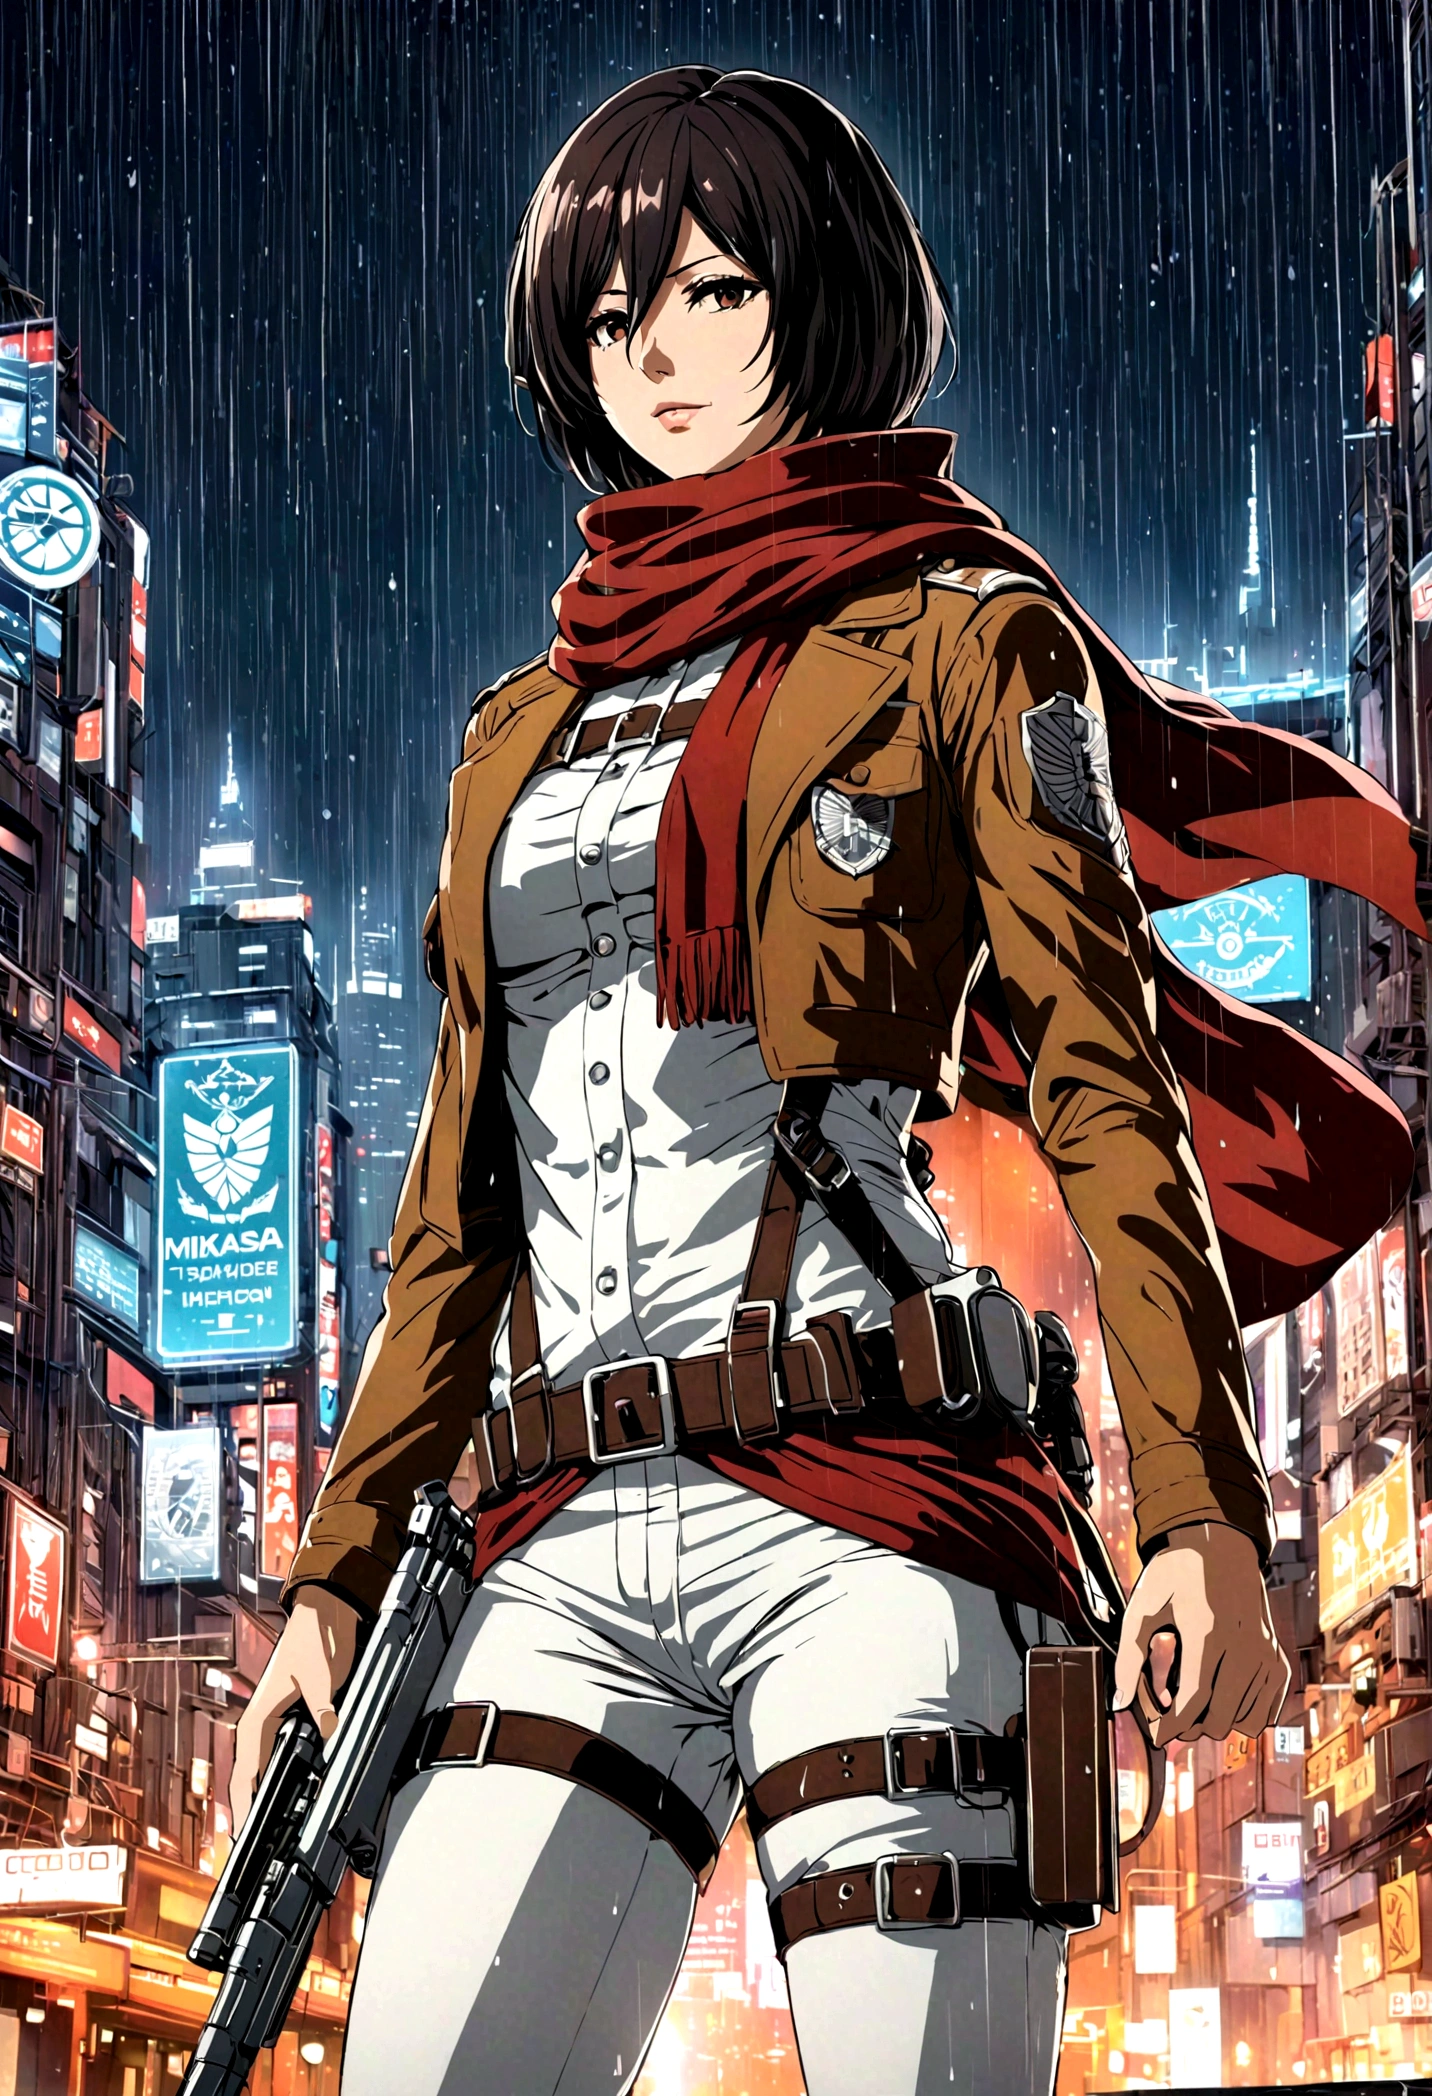 best quality, masterpiece, mikasa ackerman, Red scarf, Brown military uniform, emblem, White pants, futuristic city, night, rain,
very beautiful, Perfect composition, Intricate details, Extremely detailed